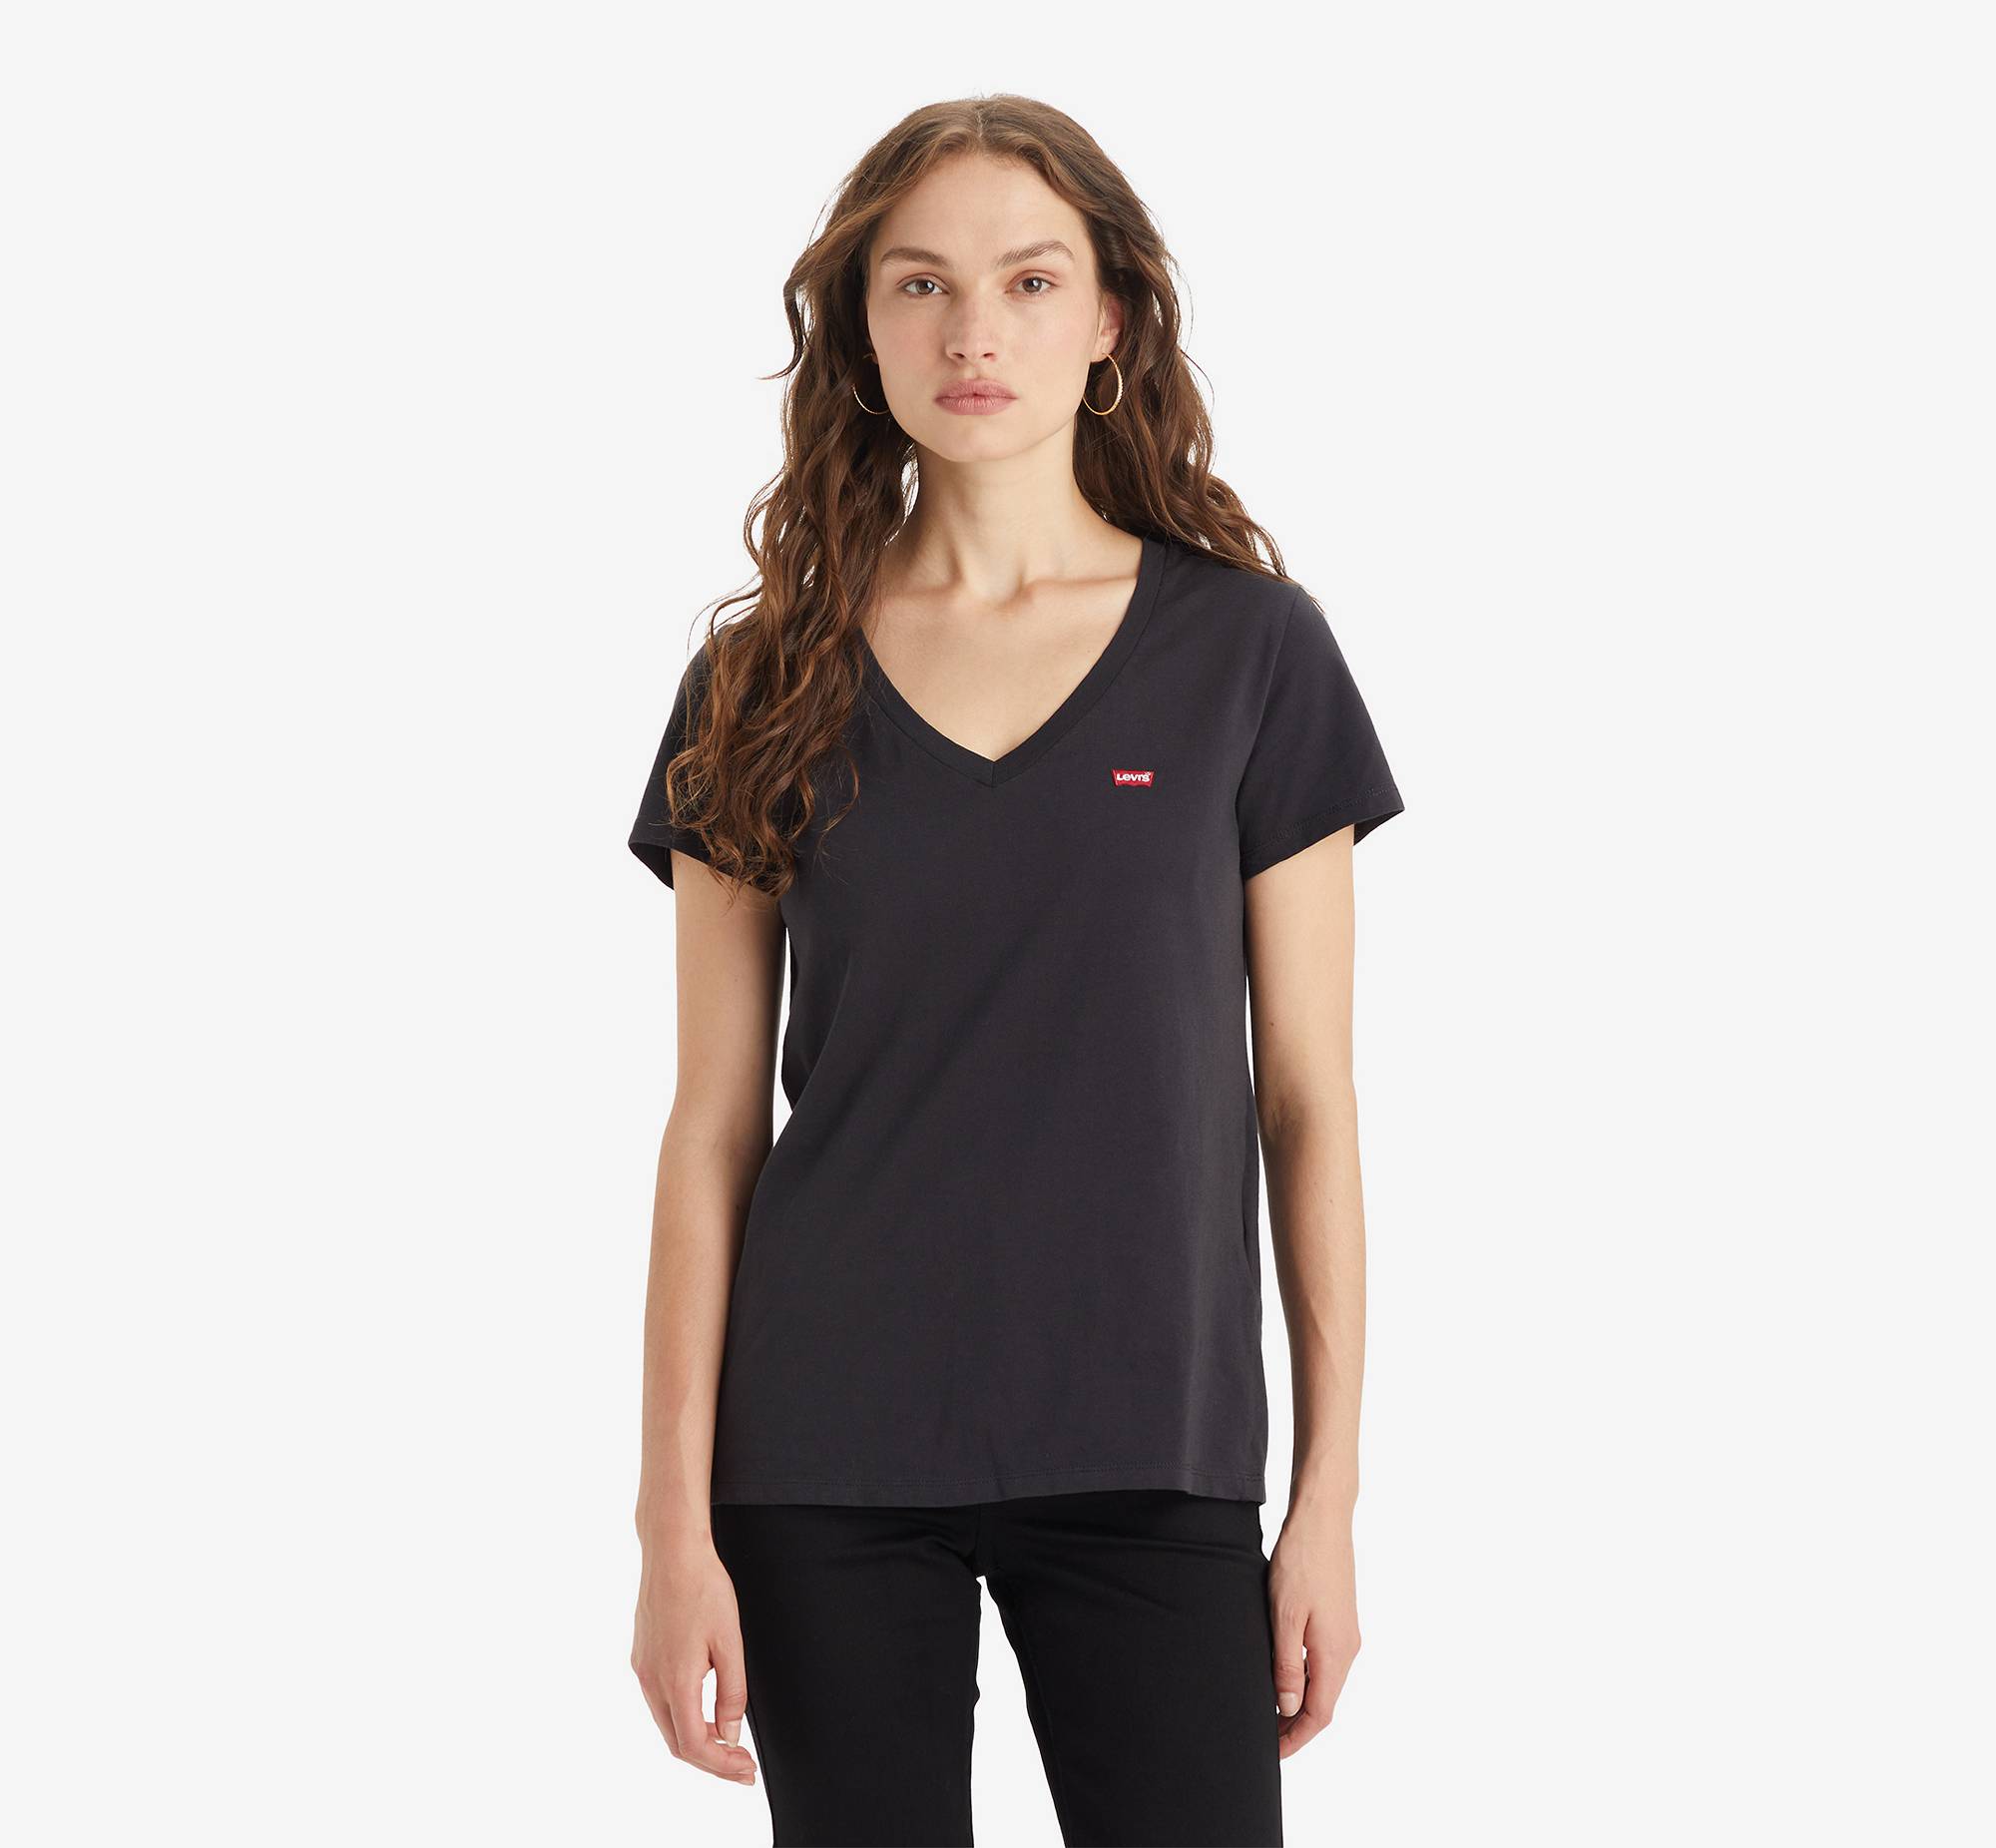 The Perfect Tee V-Neck 4